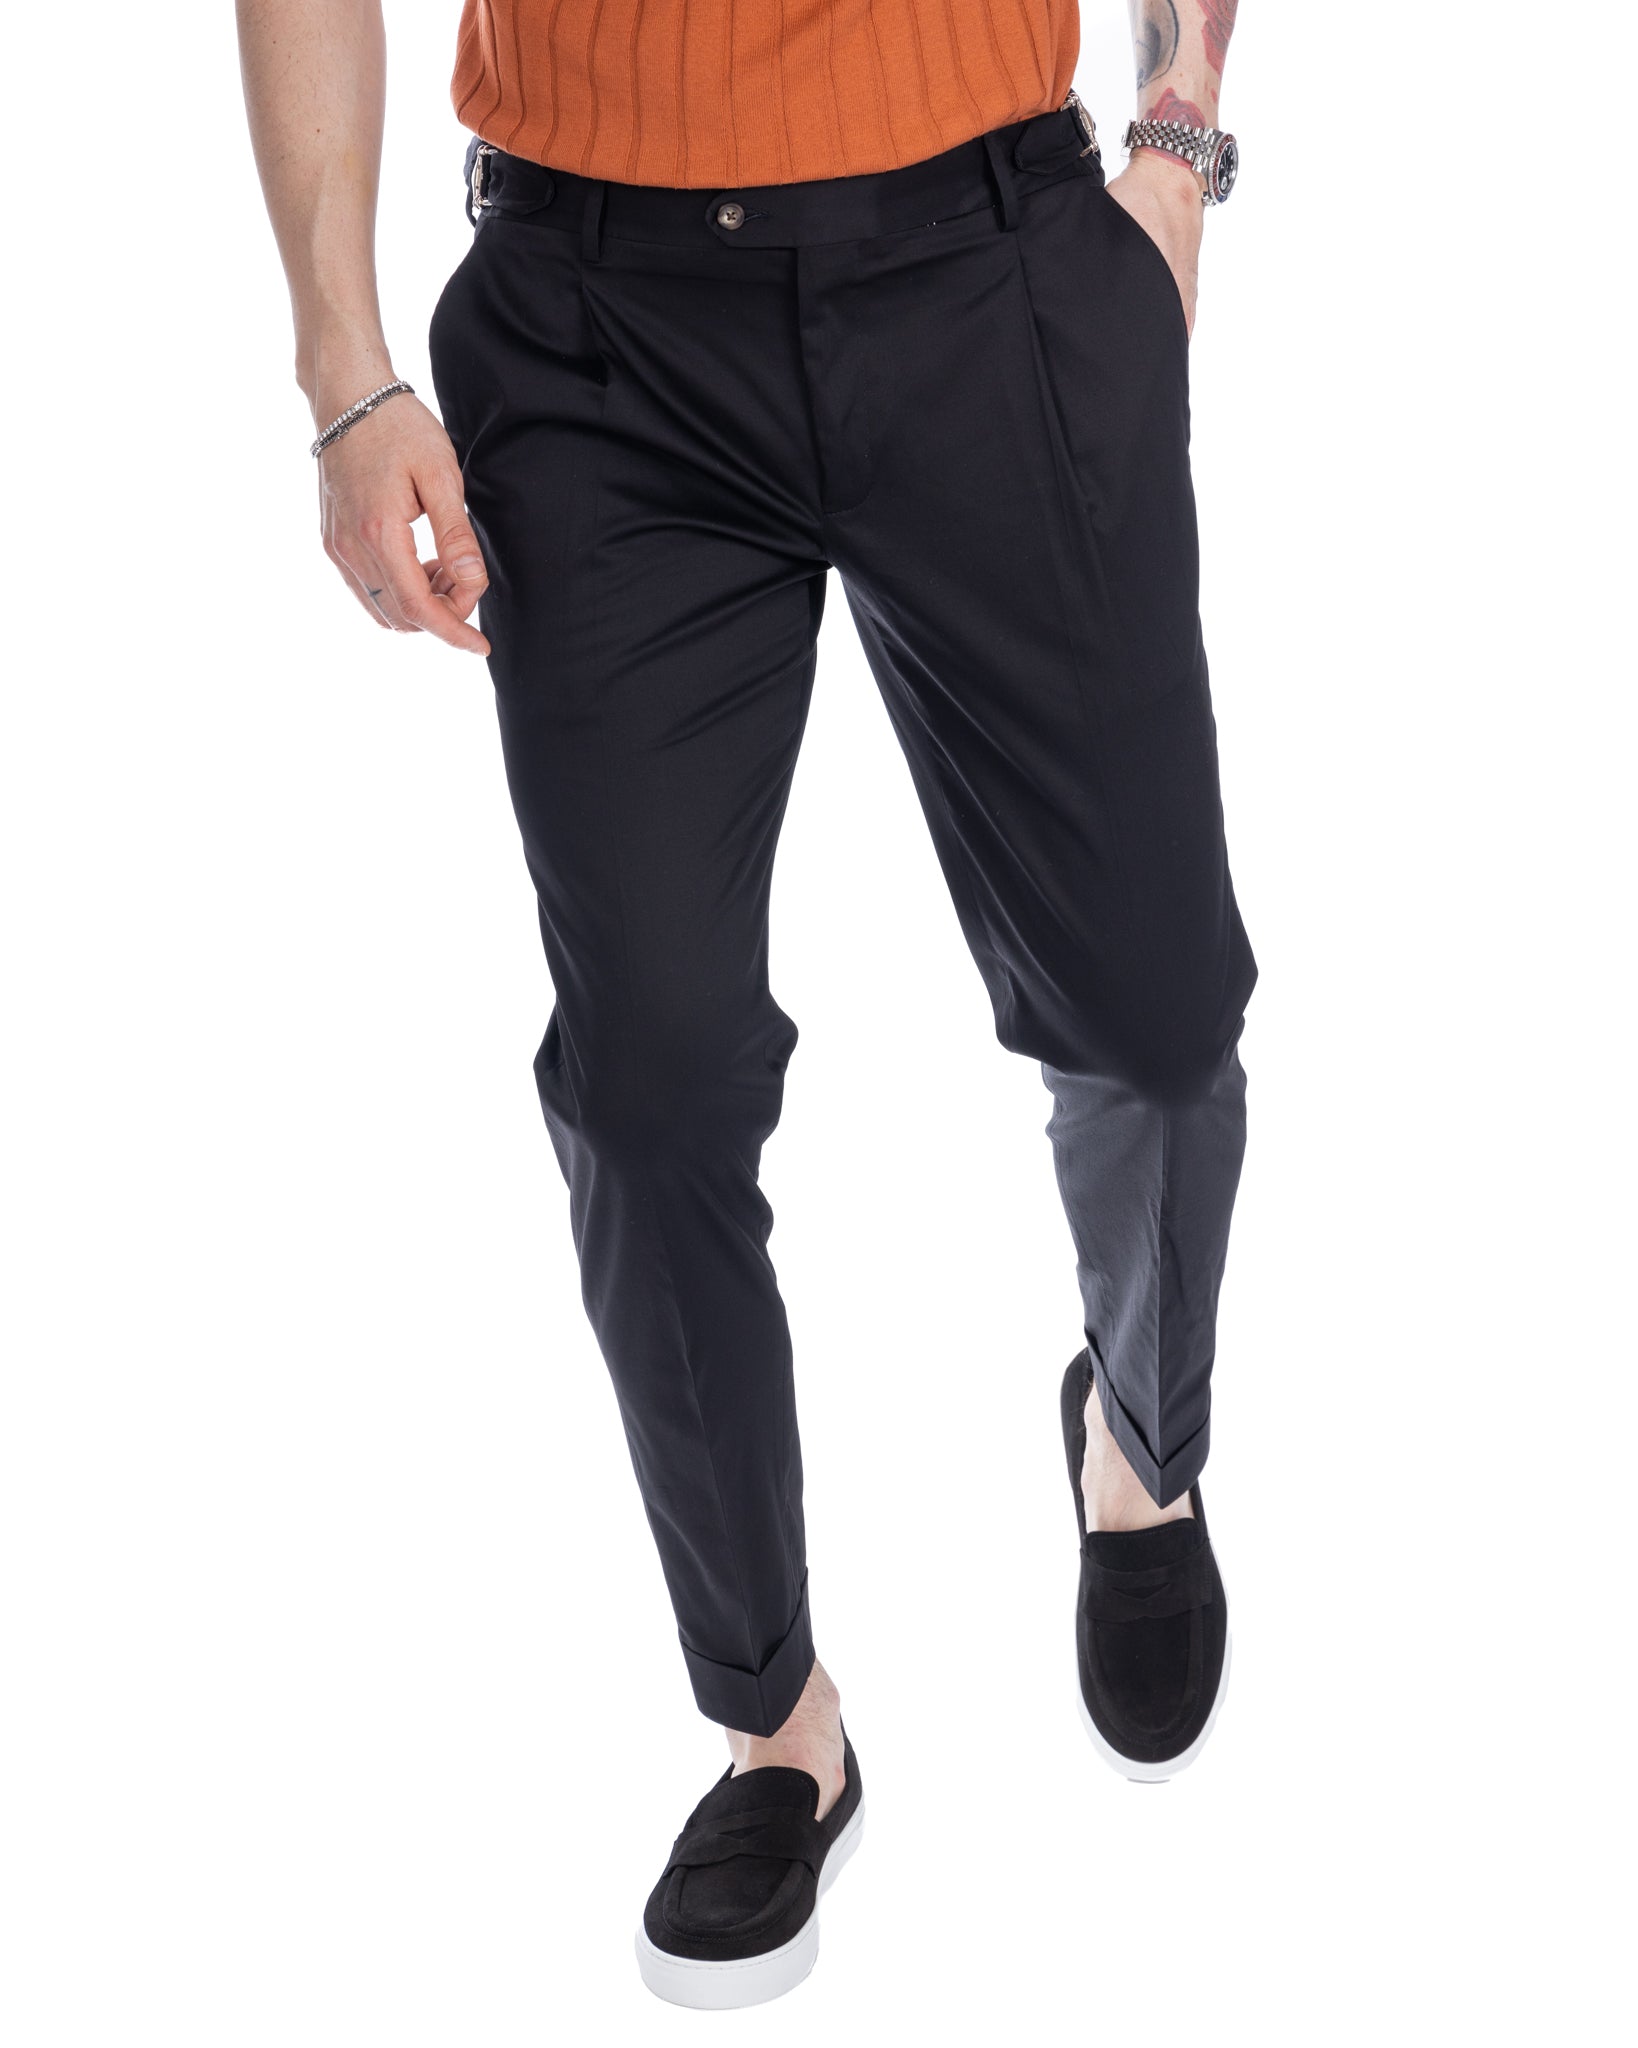 James - black high-waisted trousers with buckles